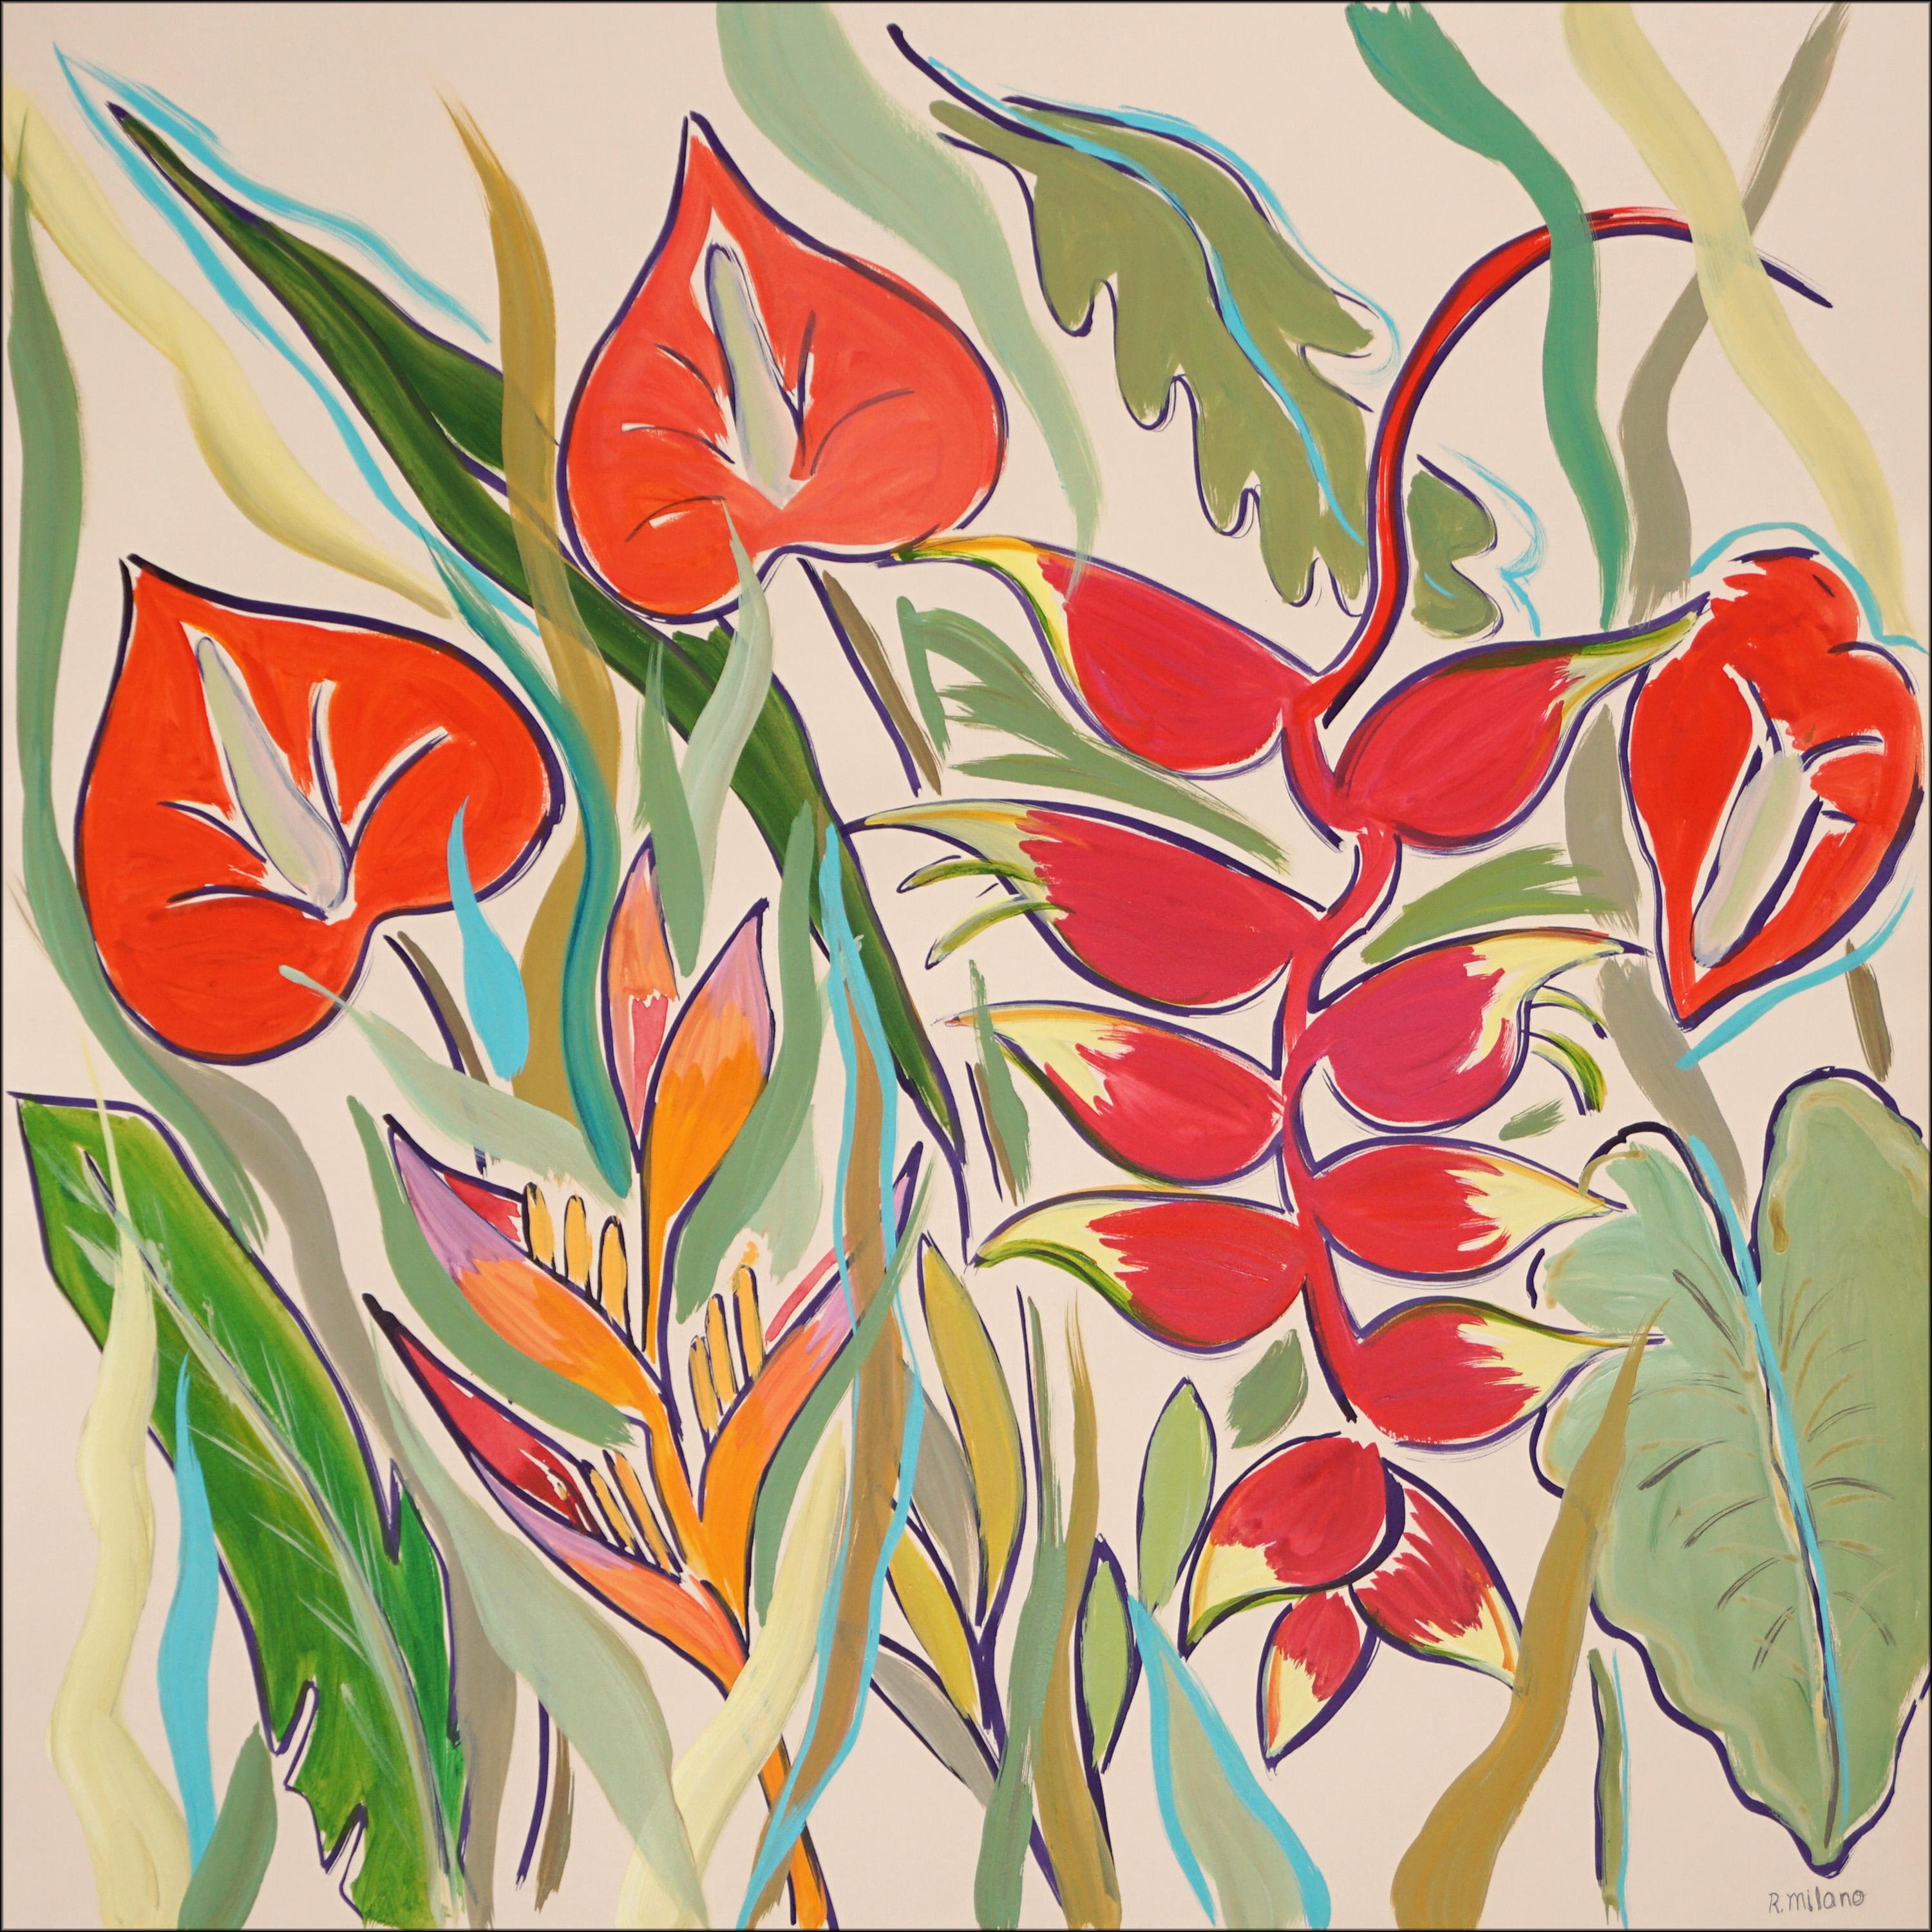 Romina Milano Still-Life Painting - Squared Tropical Garden, Red Flamingo Flowers Landscape, Botanical Green Leaves 